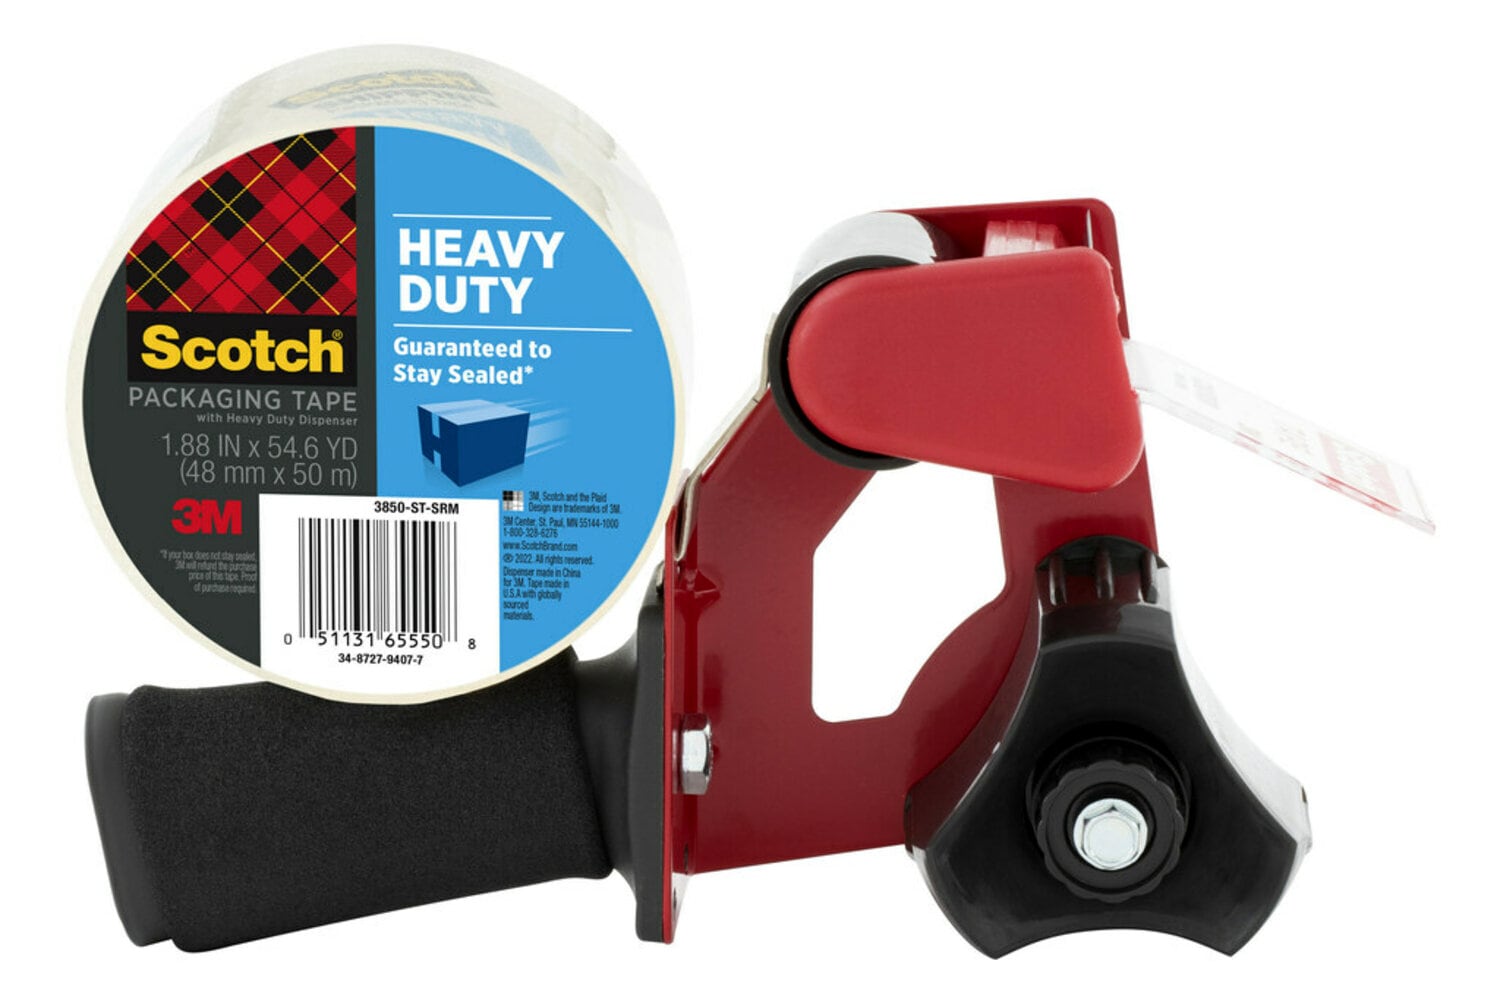 7100288393 - Scotch Heavy Duty Packaging Tape Dispenser ST-181, Foam Handle with Retractable Blade